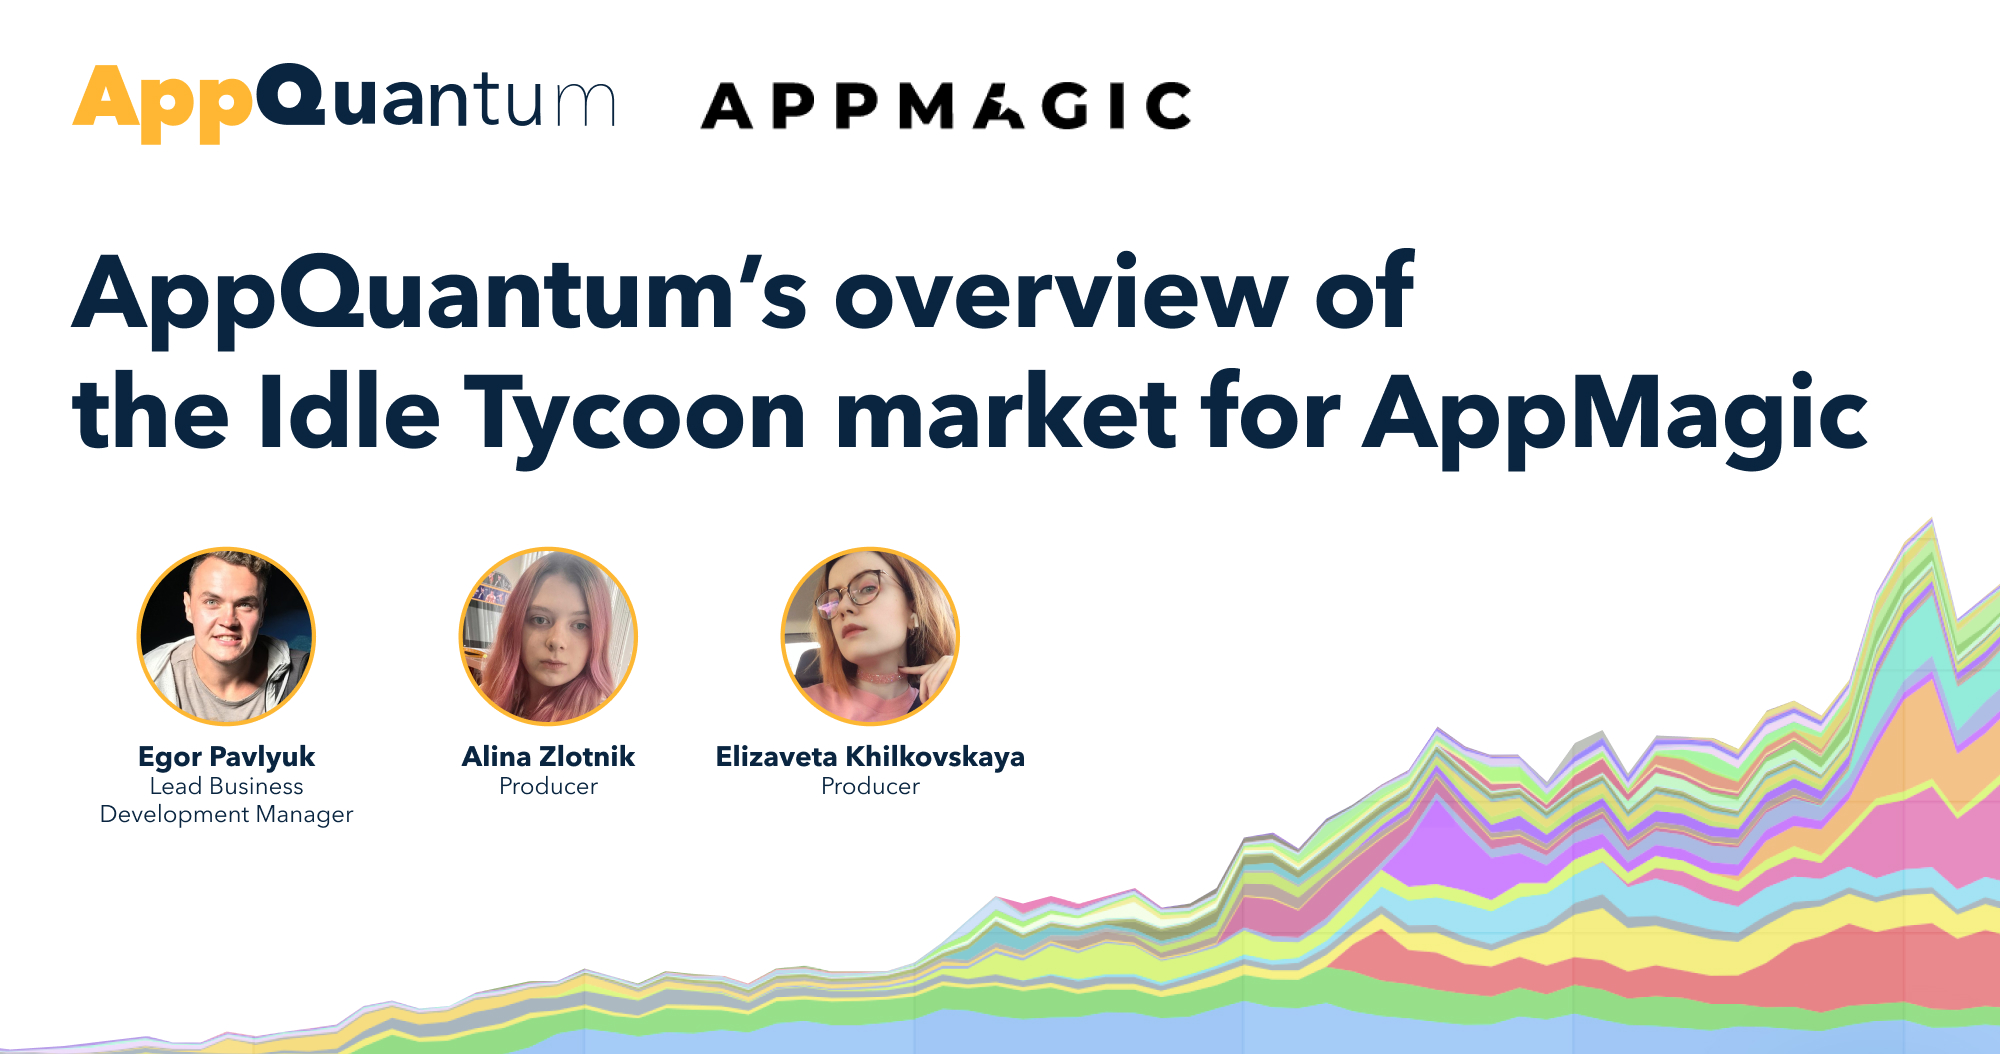 AppQuantum’s Overview of the Idle Tycoon Market for AppMagic